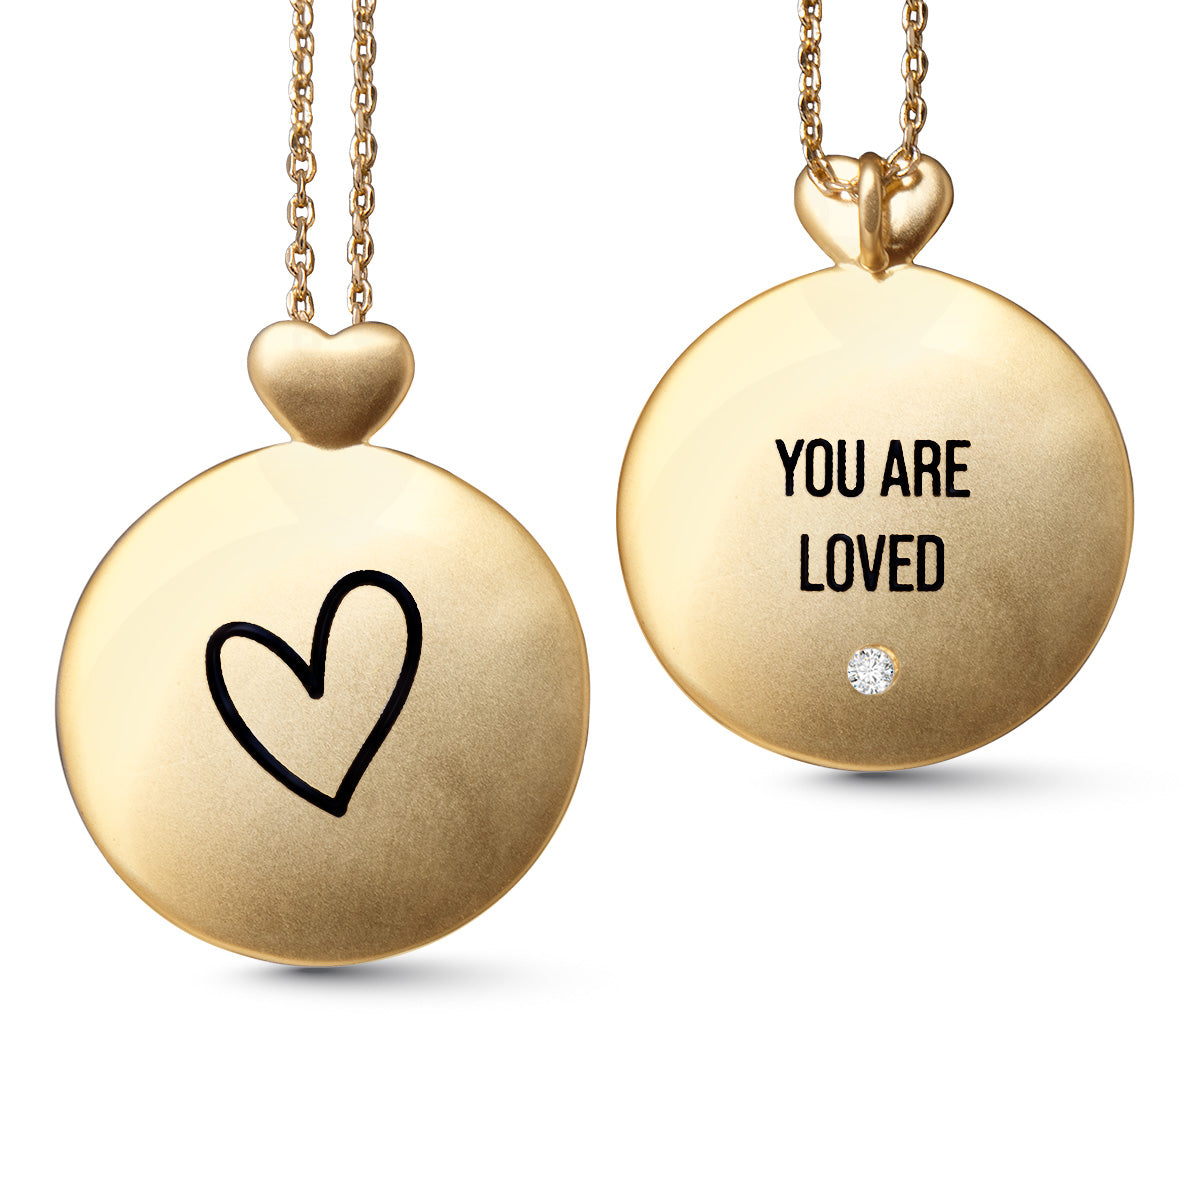 Gold Necklace w/ Heart Loved Pendant